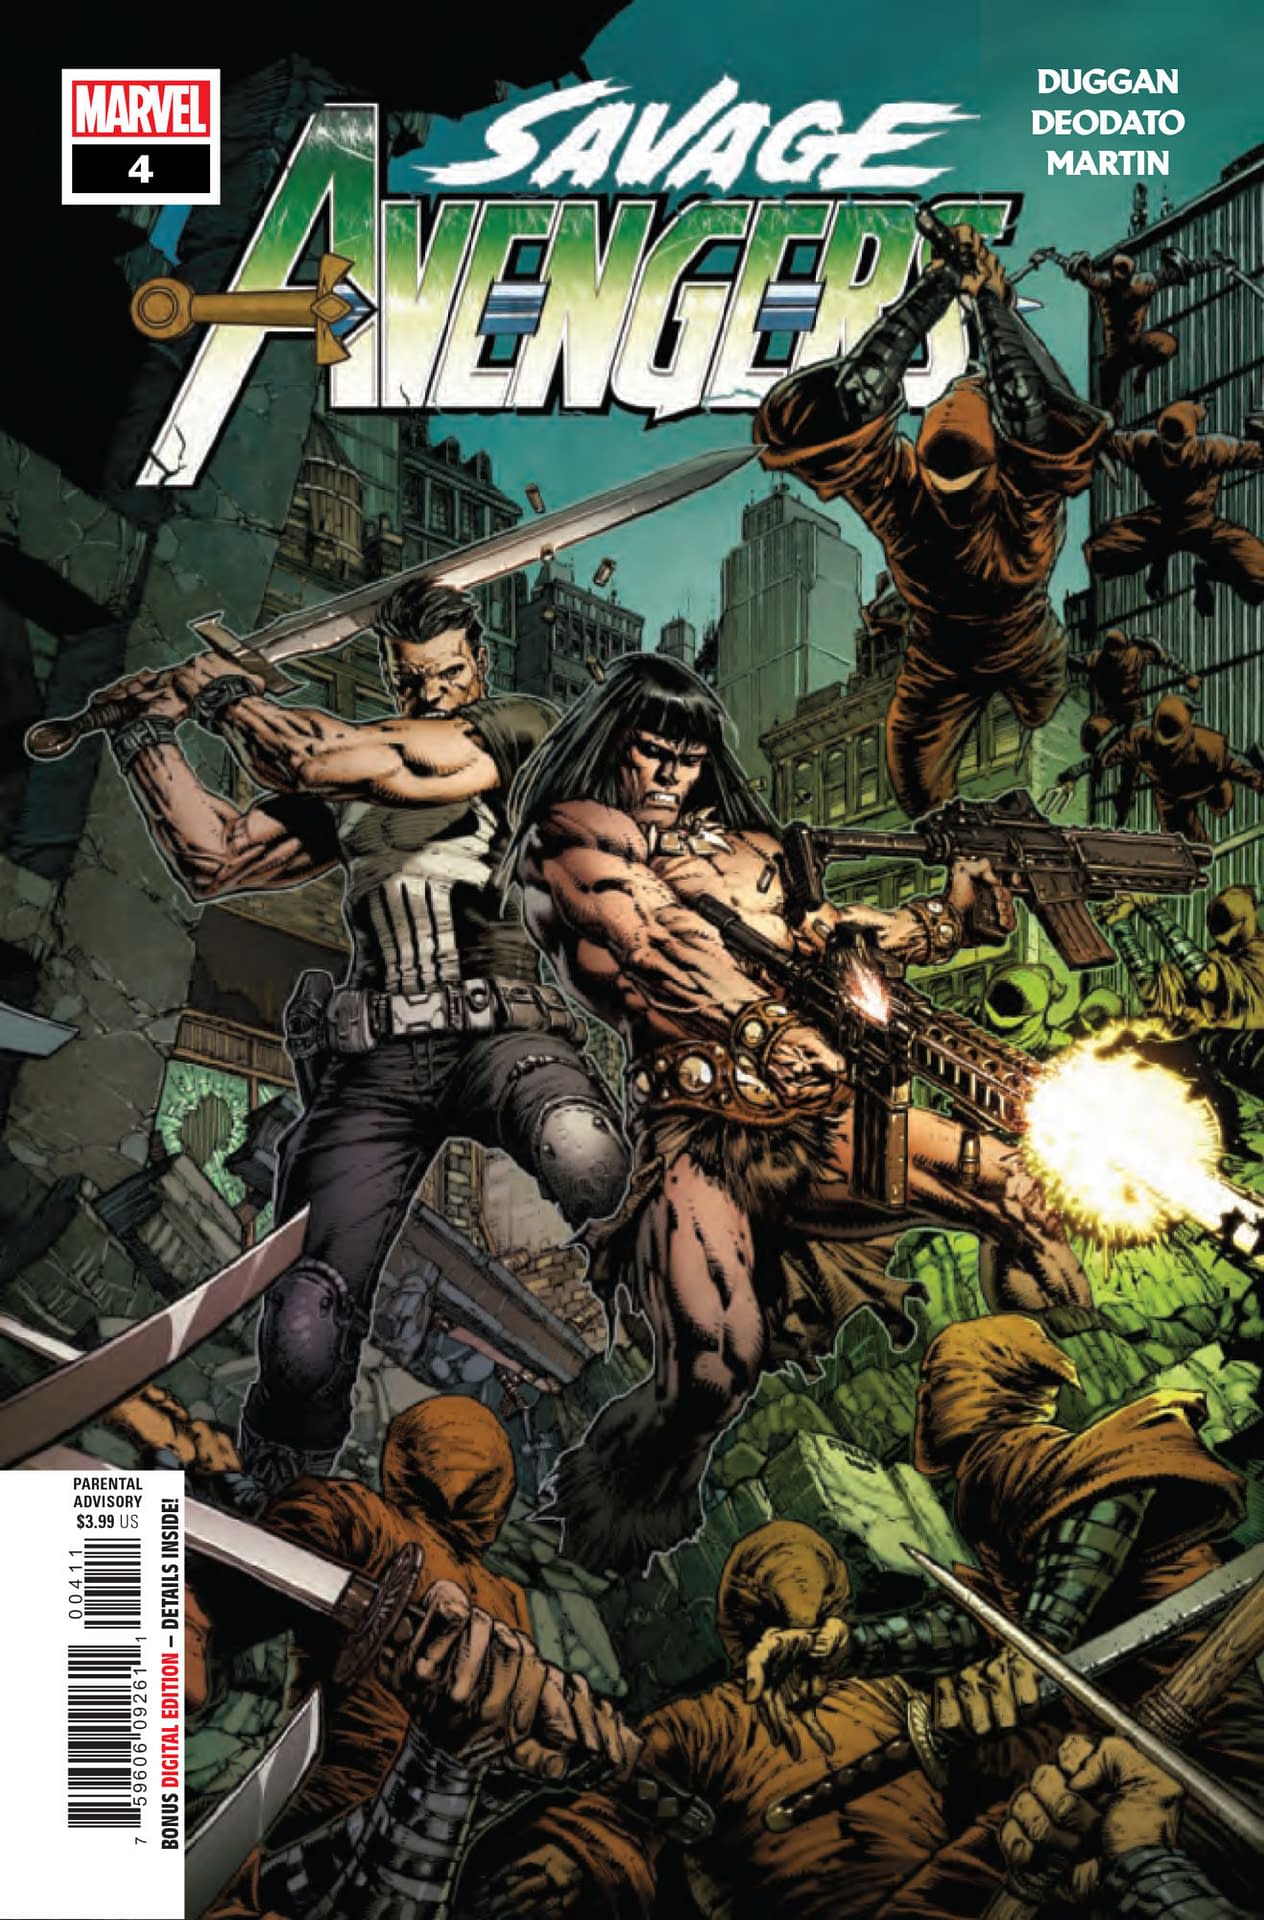 Killing a God in Savage Avengers #4 [Preview]